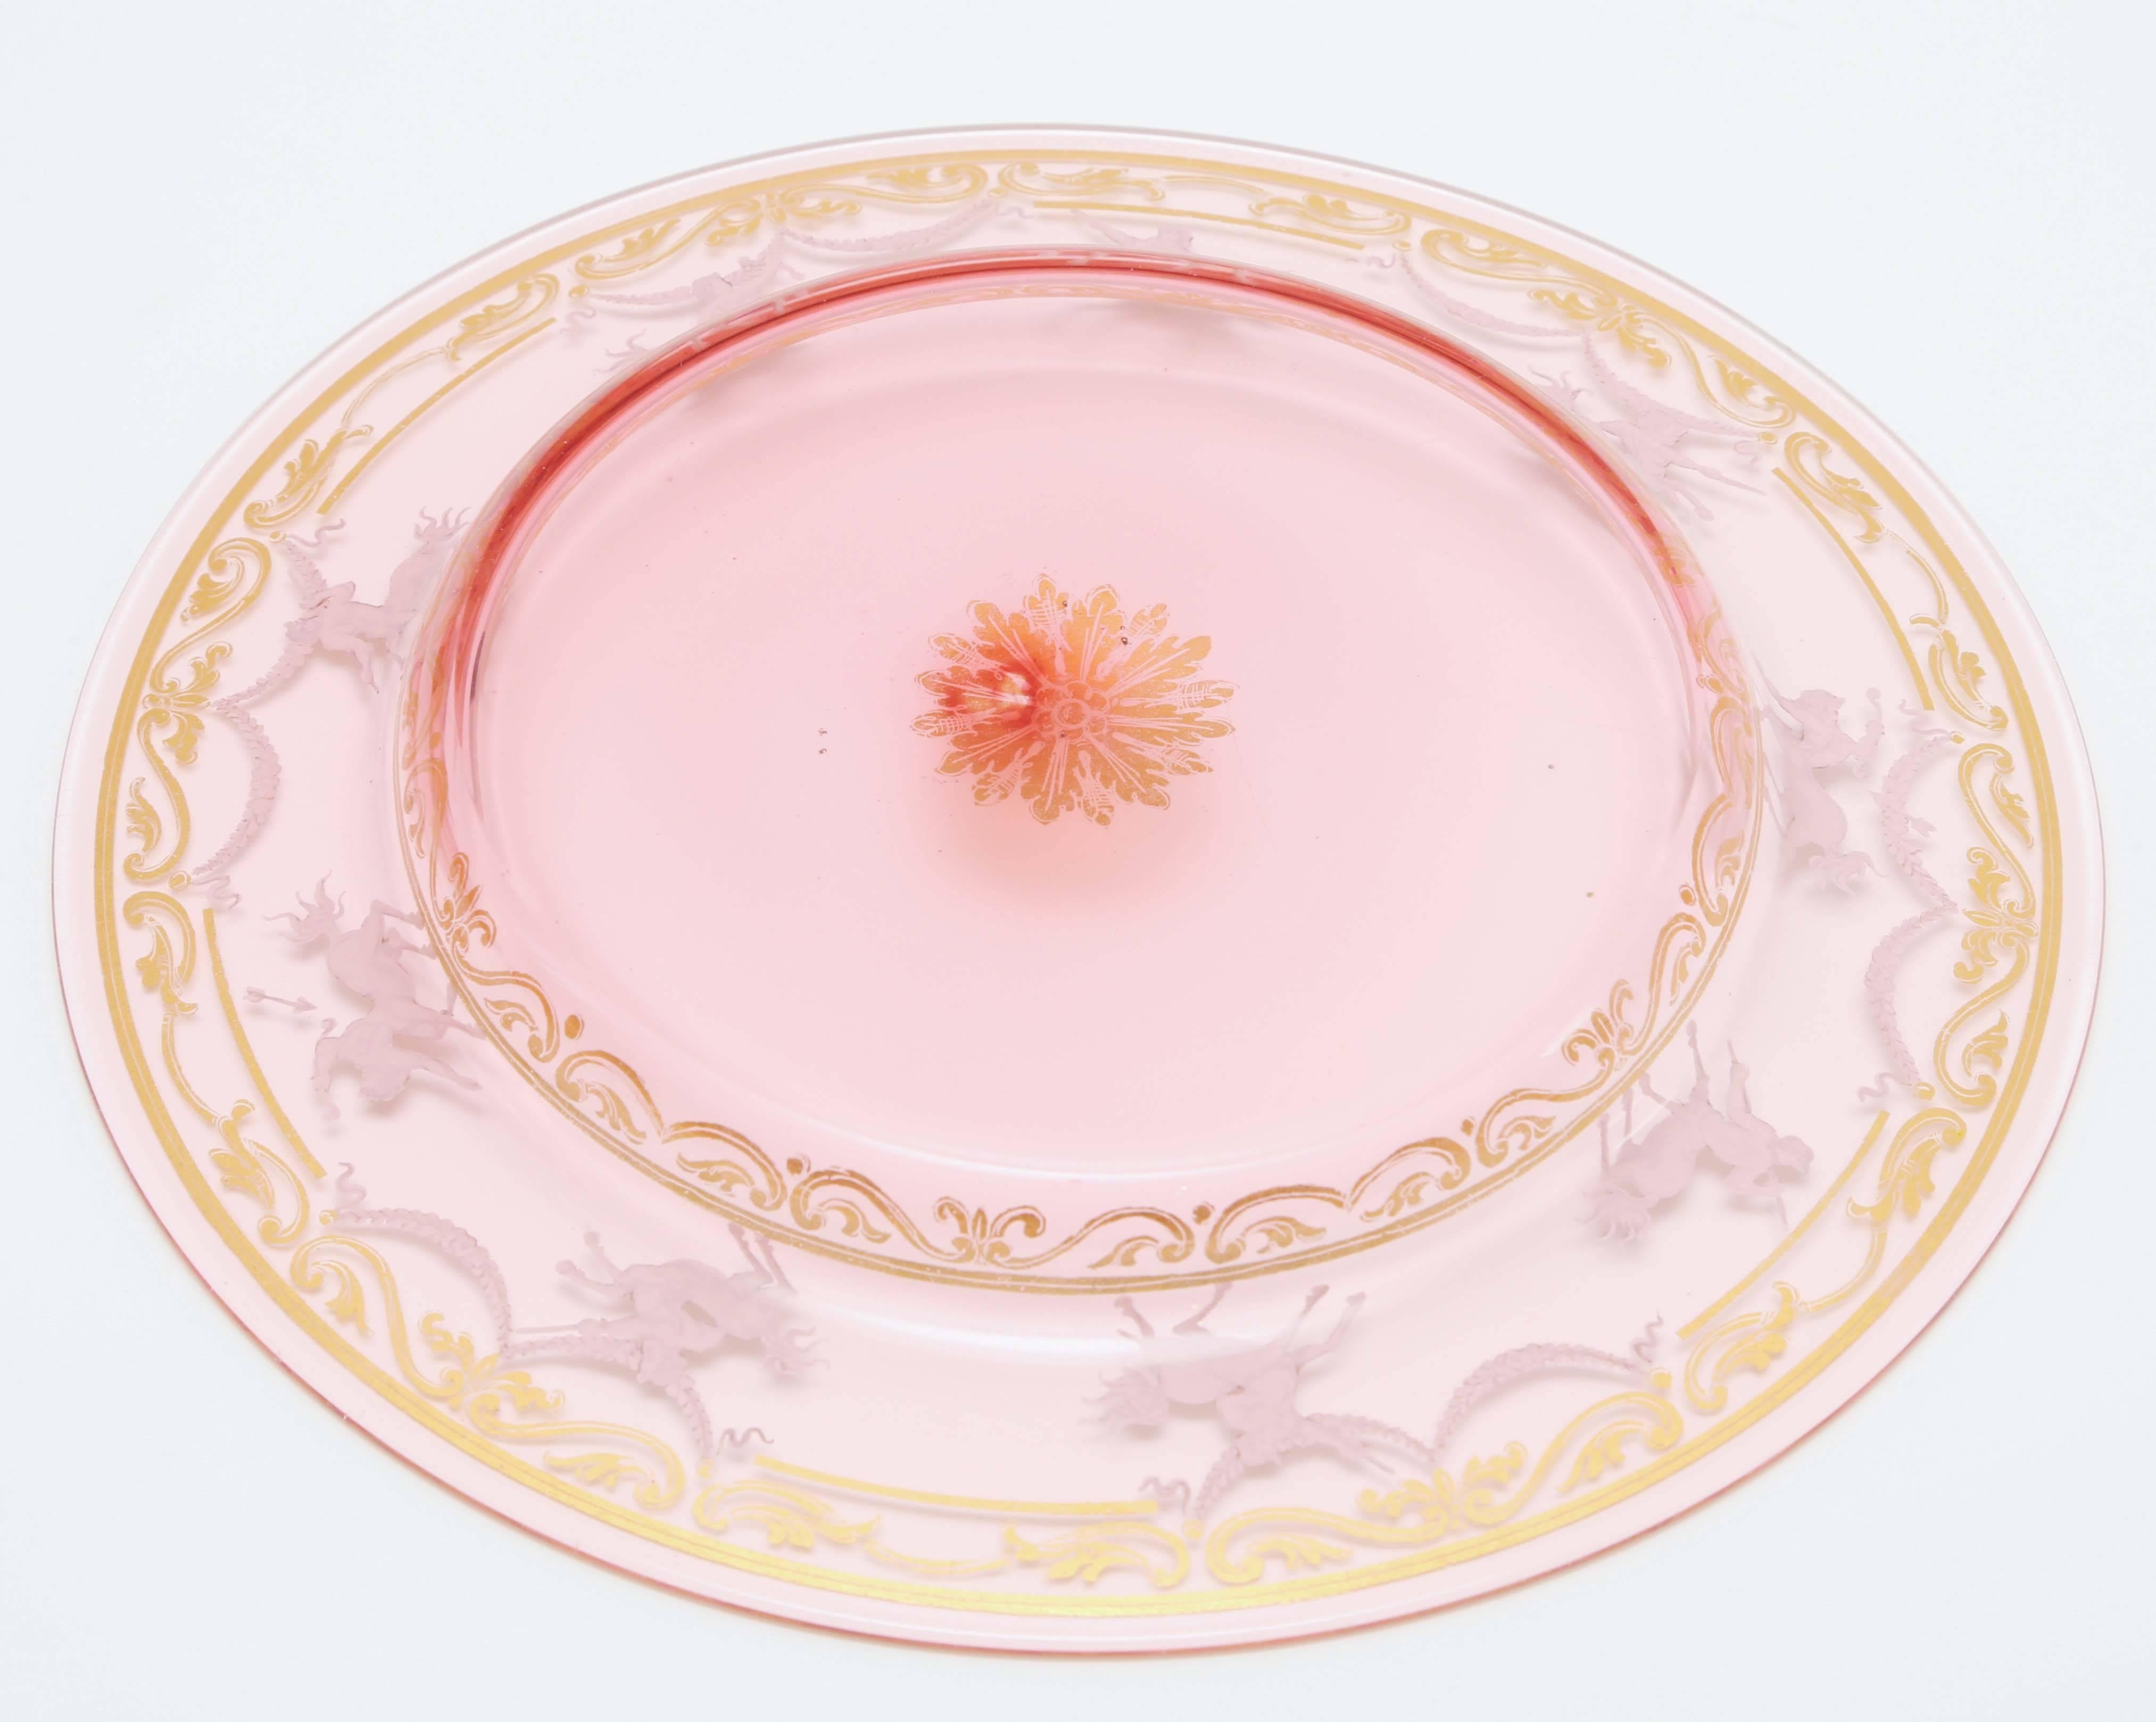 Hand-Crafted 12 Venetian Antique Plates, Pretty Pink and Gilt with Hand Enamel Decoration